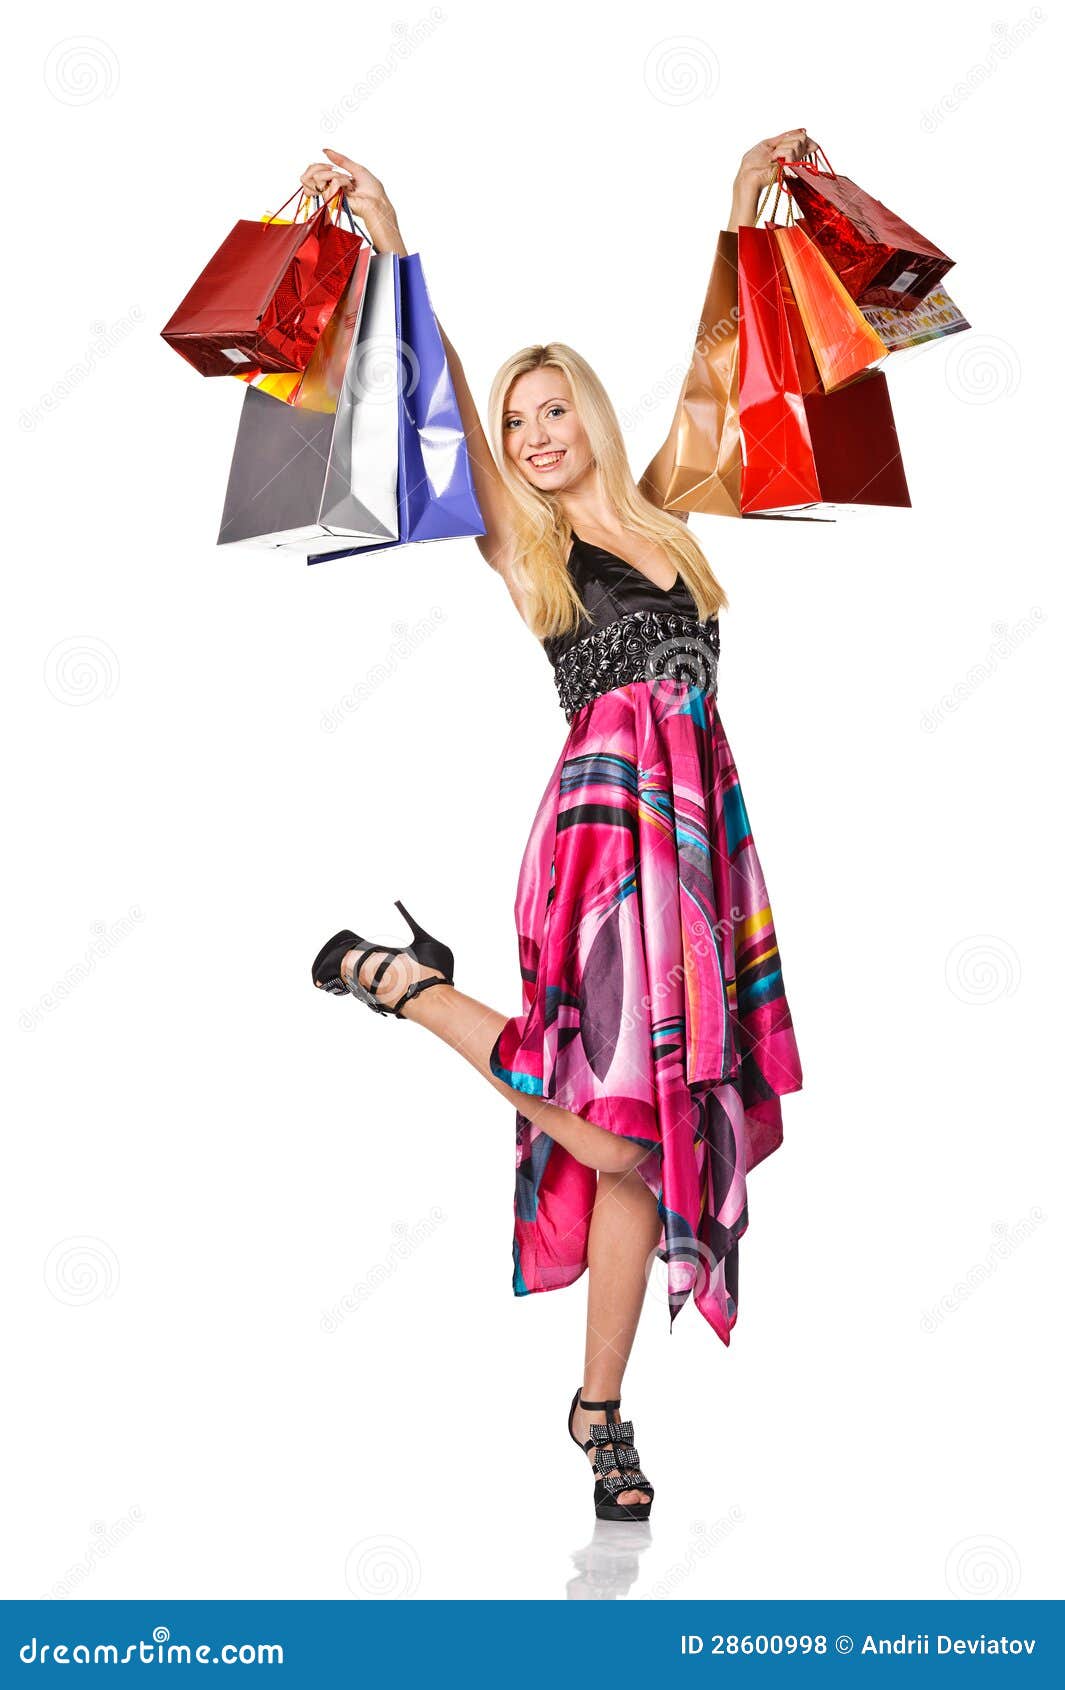 shopaholic. picture of lovely woman with shopping bags